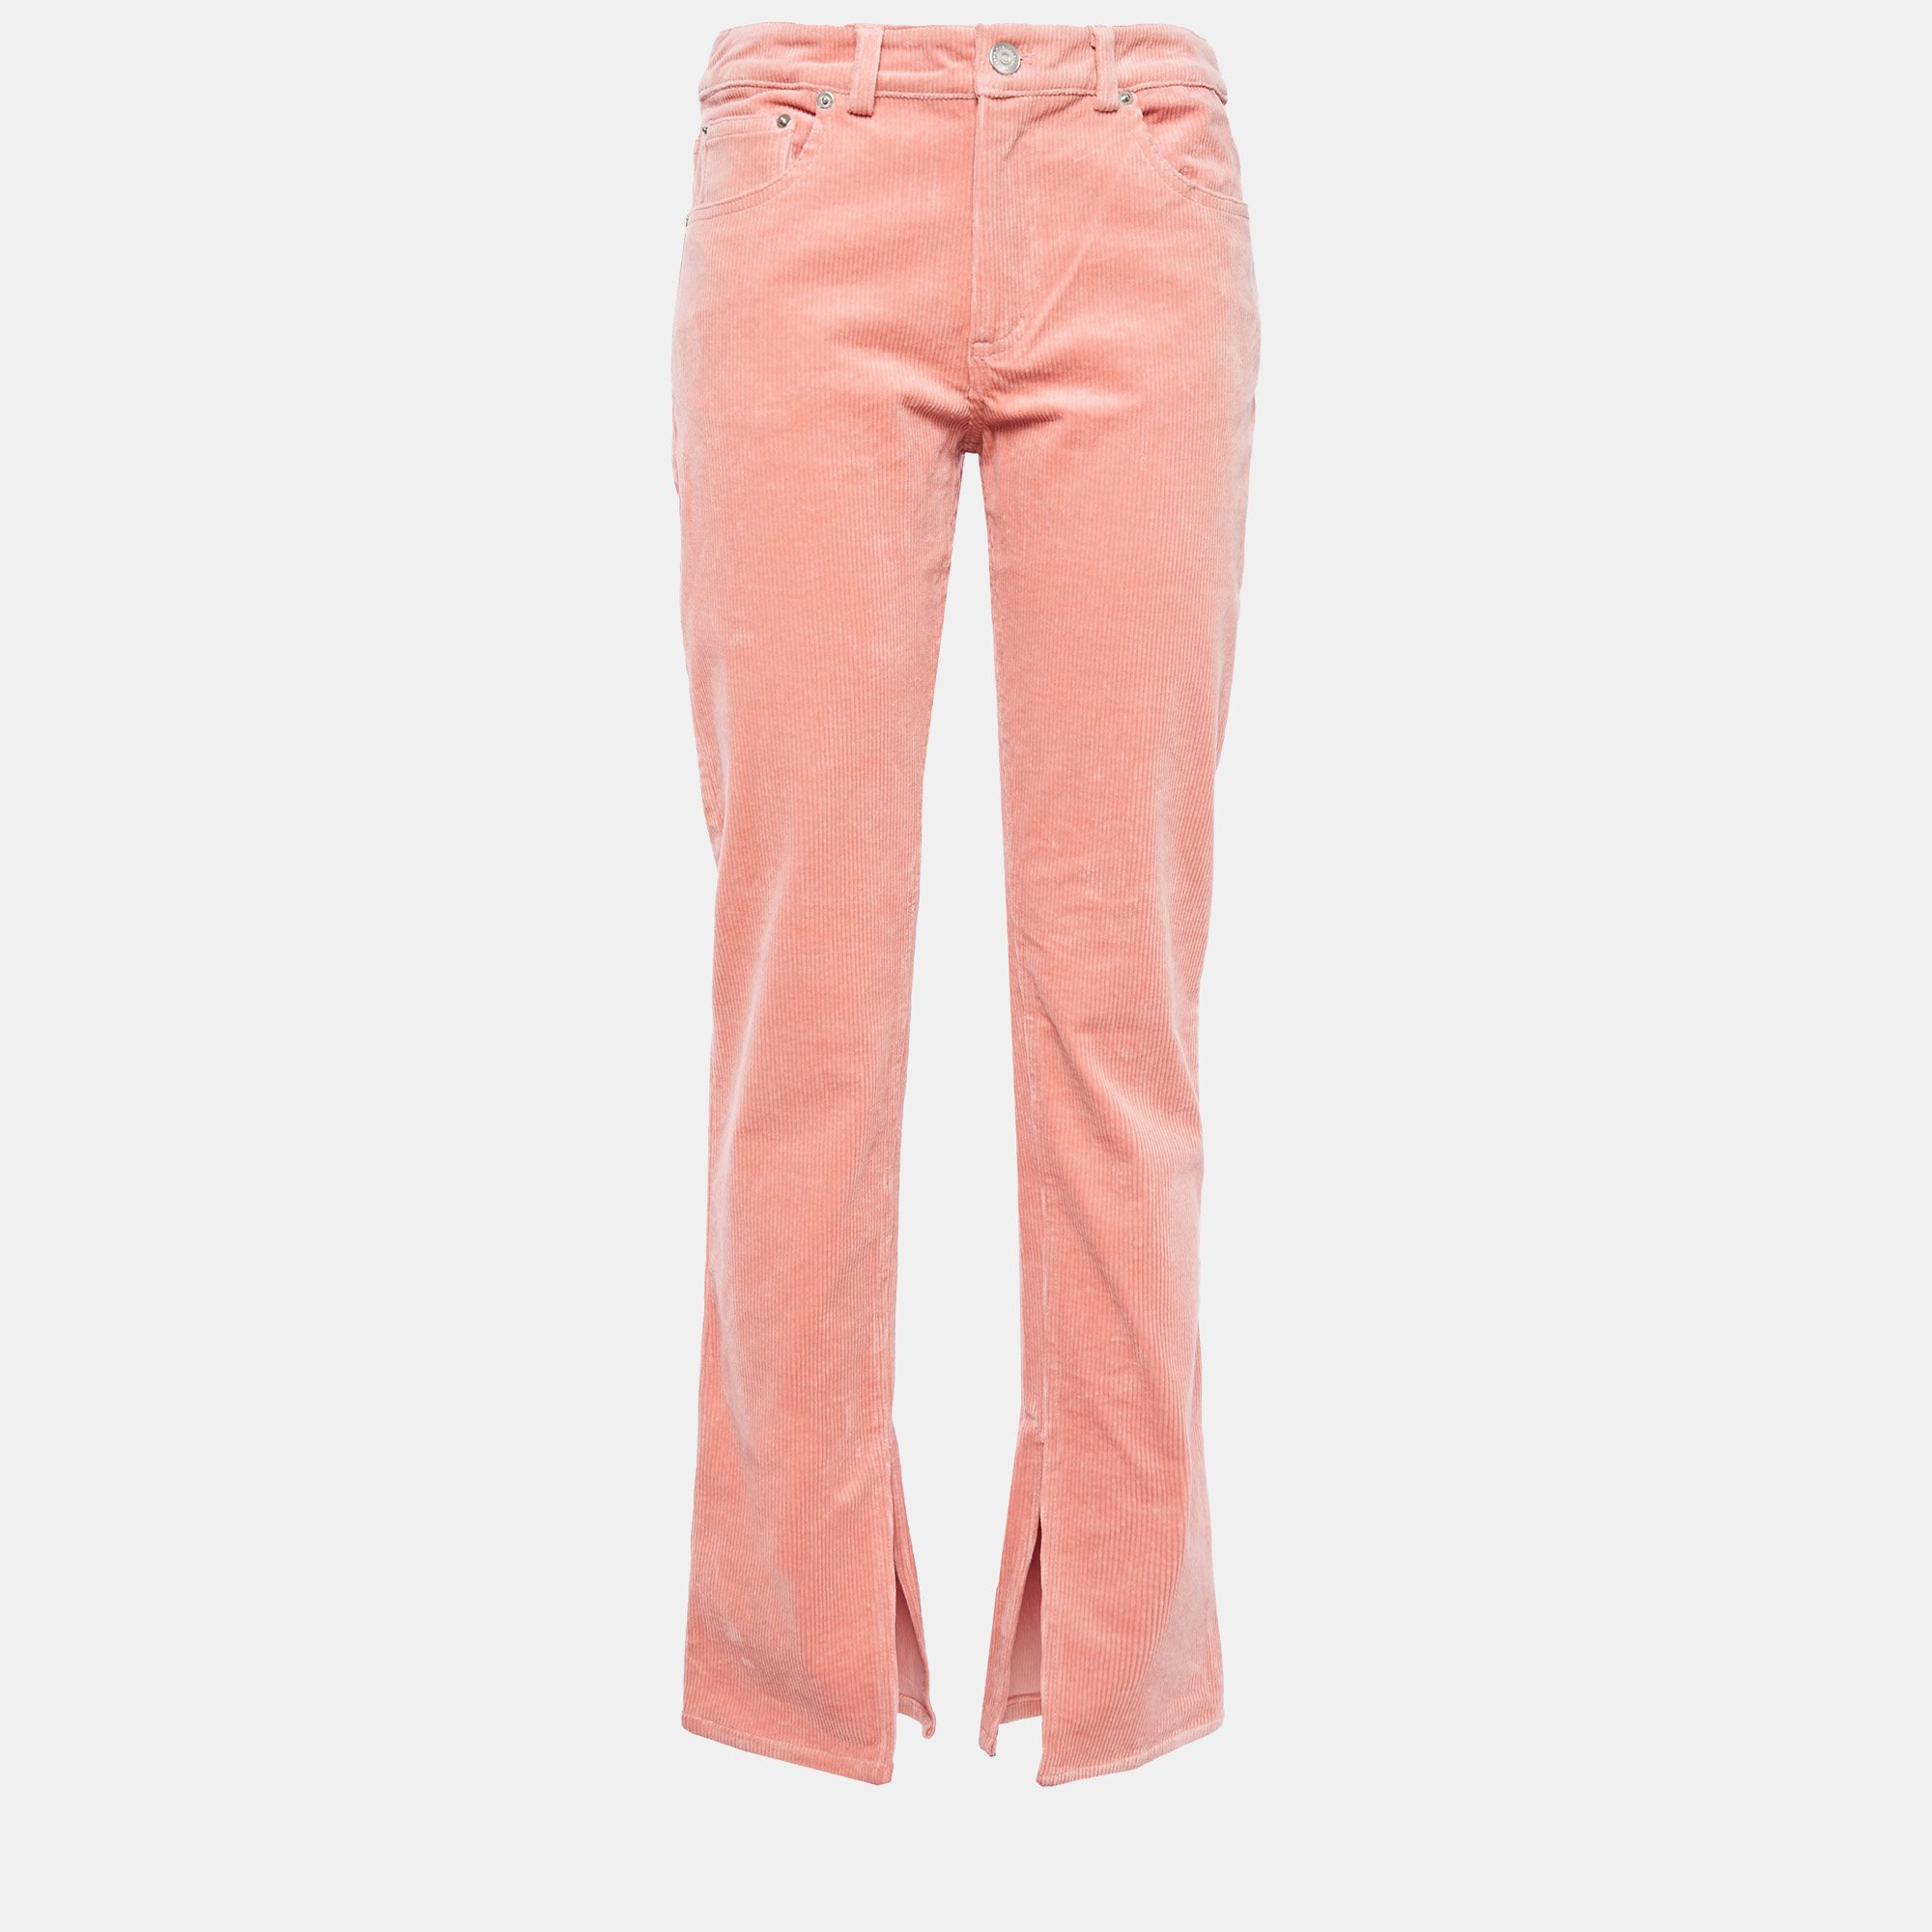 Pre-owned Ganni Pink Corduroy Pants Size 42